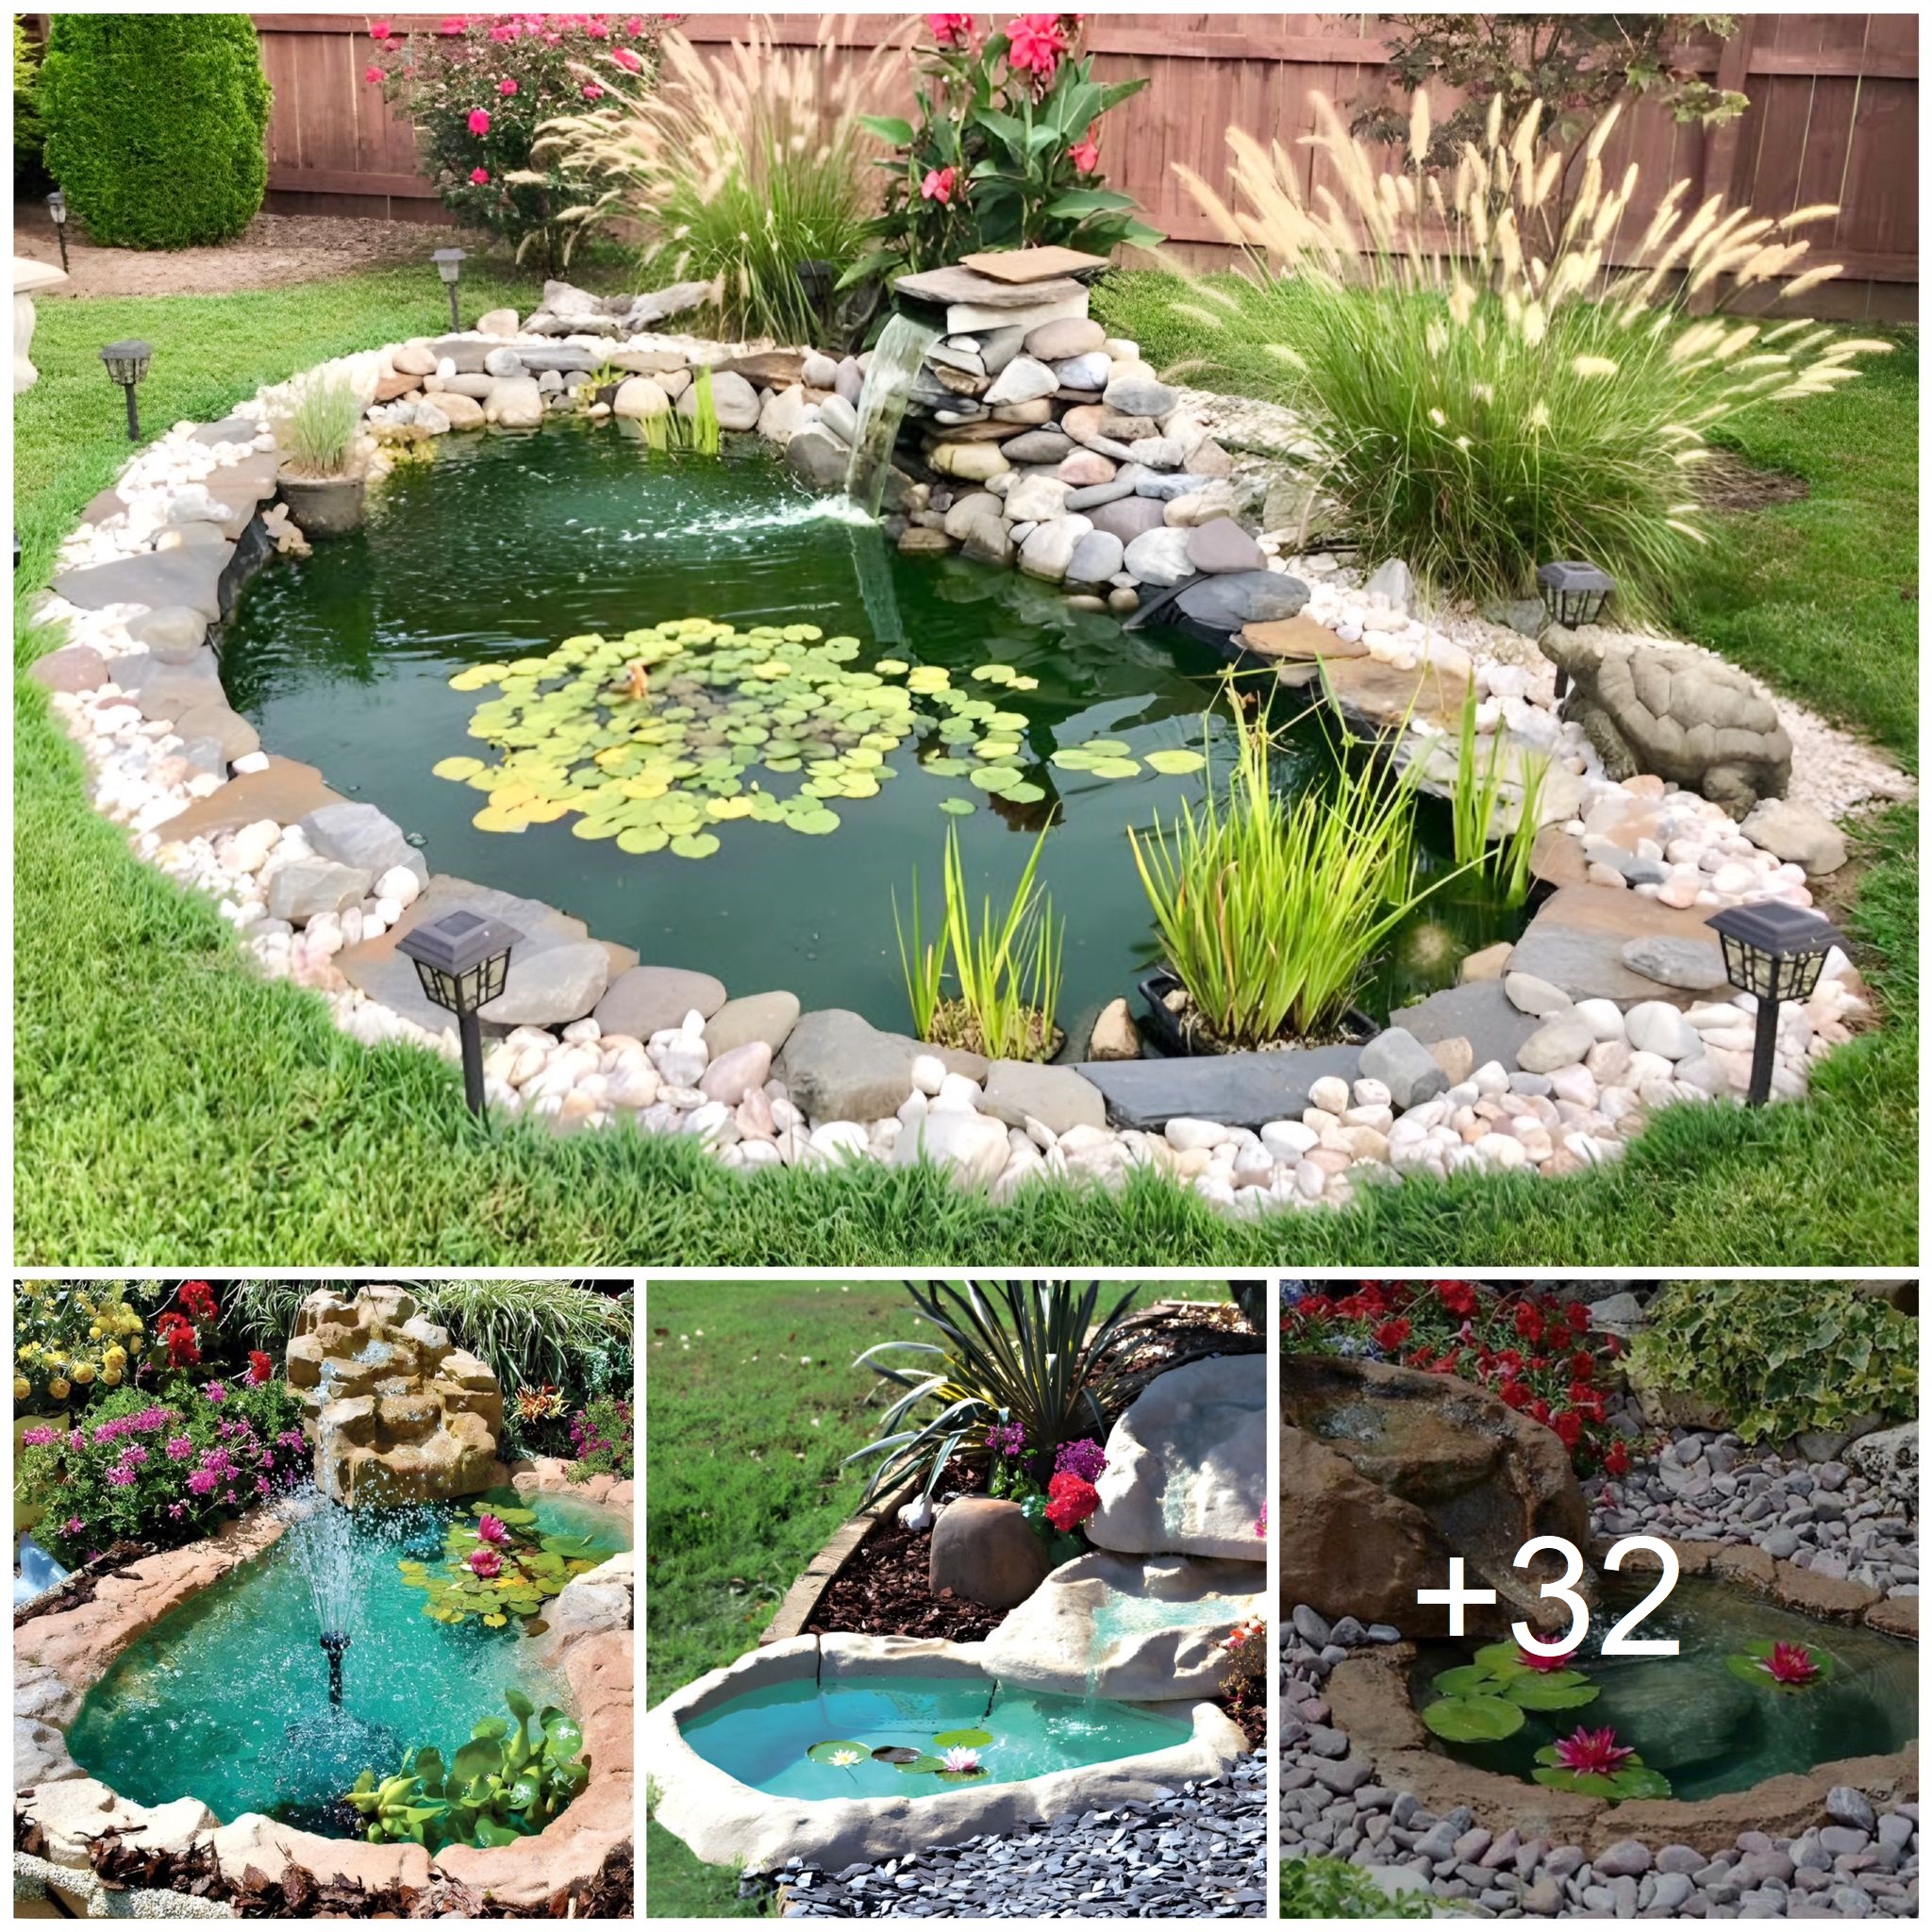 How to build Beautiful garden pond very easy from stryfoam and cement